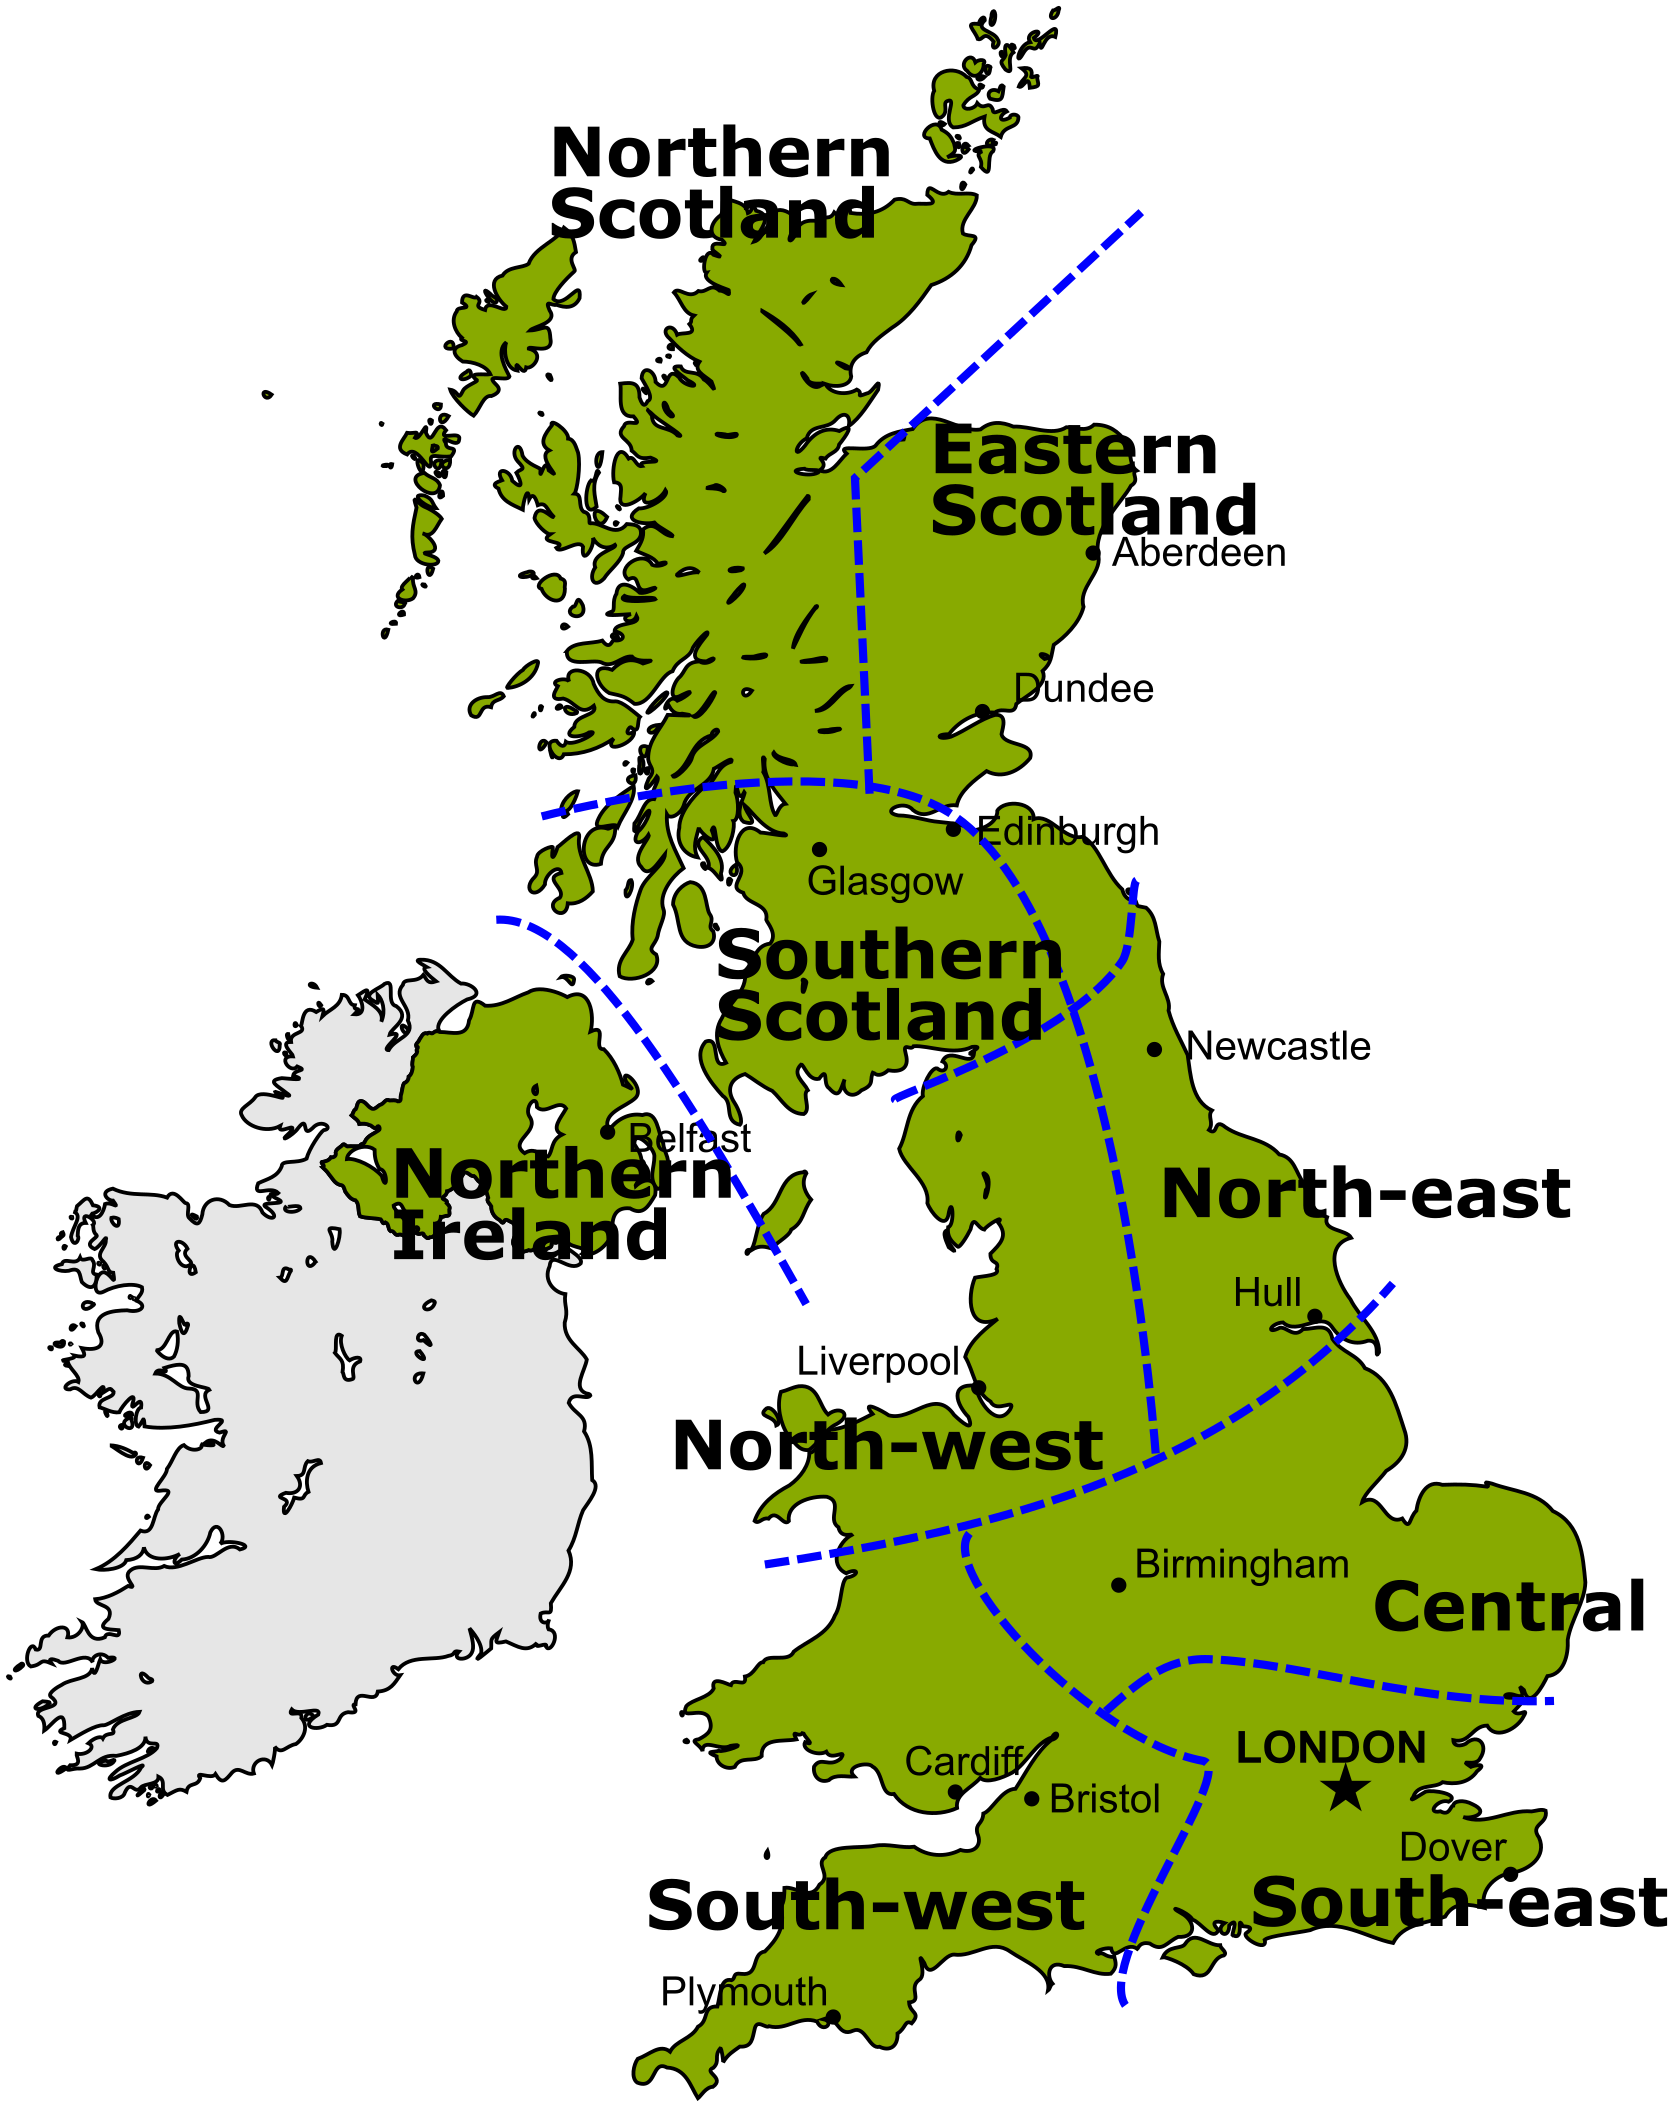 Map of the UK showing the approximate delineations of the Met Office weather regions